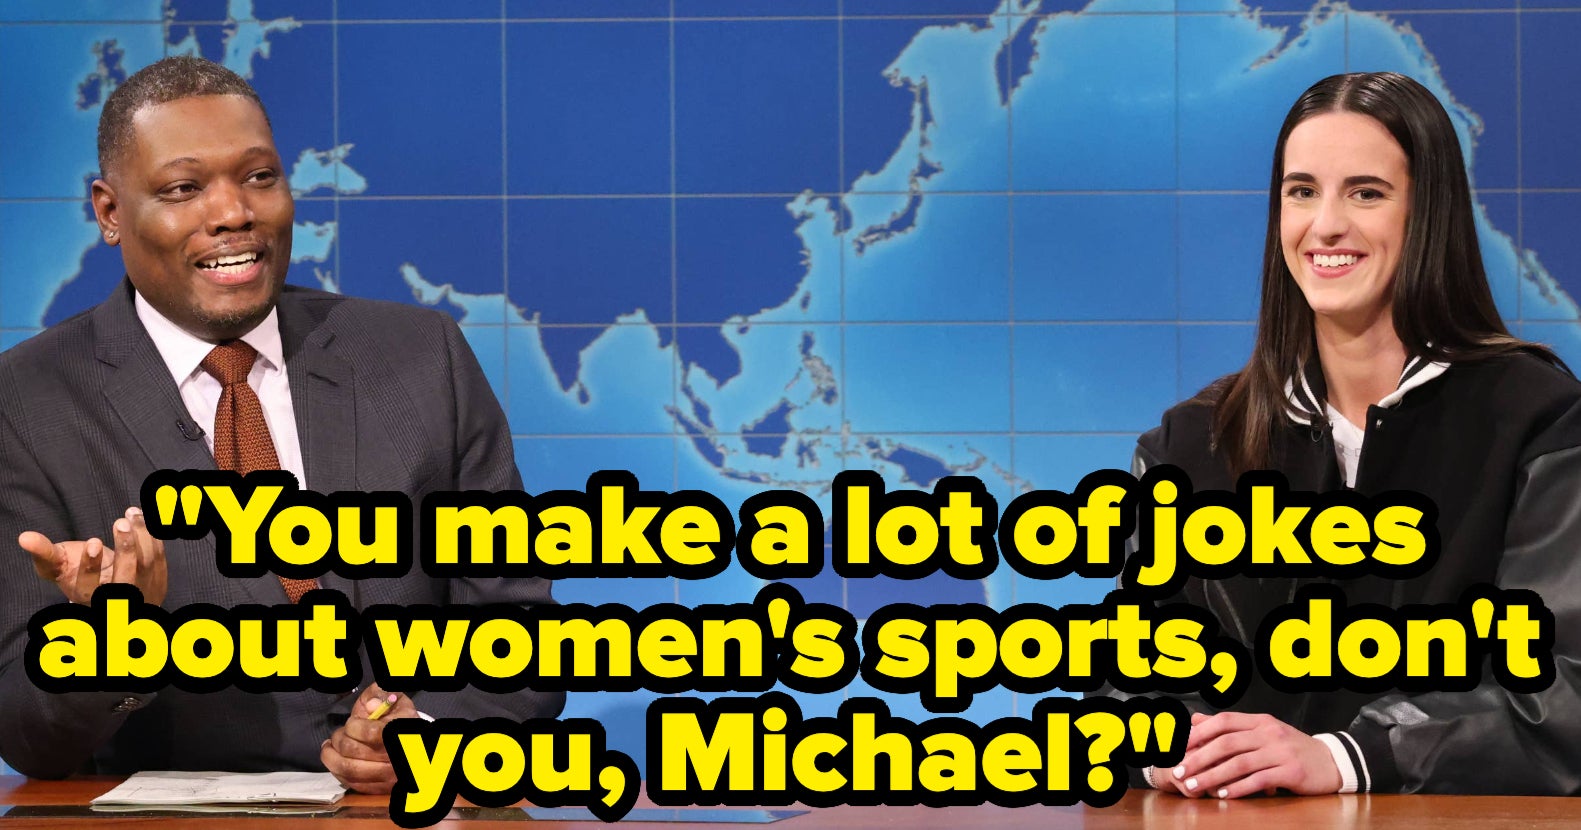 Caitlin Clark Hilariously Confronted Michael Che On "SNL" About His Women's Basketball Jokes